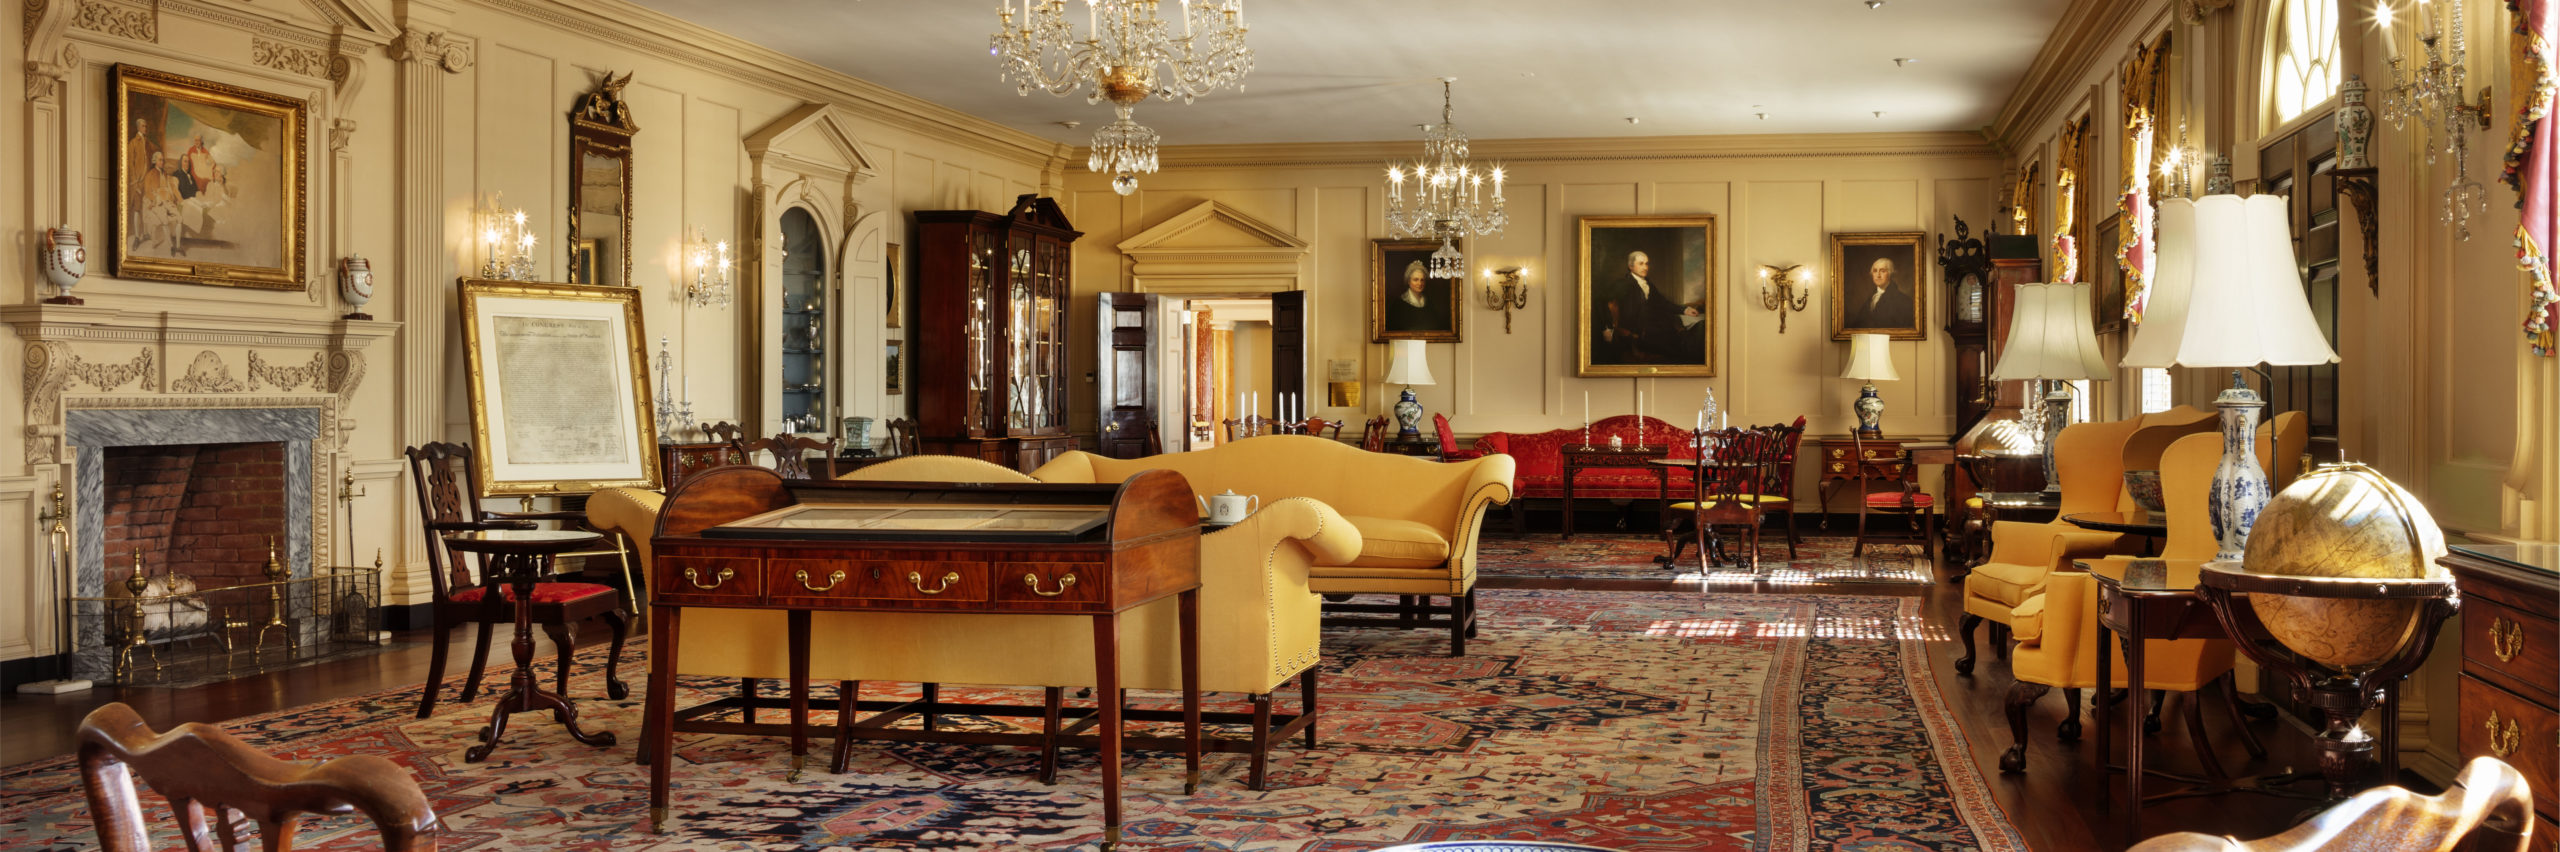 Reception Rooms, U.S. Dept. of State [State Department Image - Chris Stump]